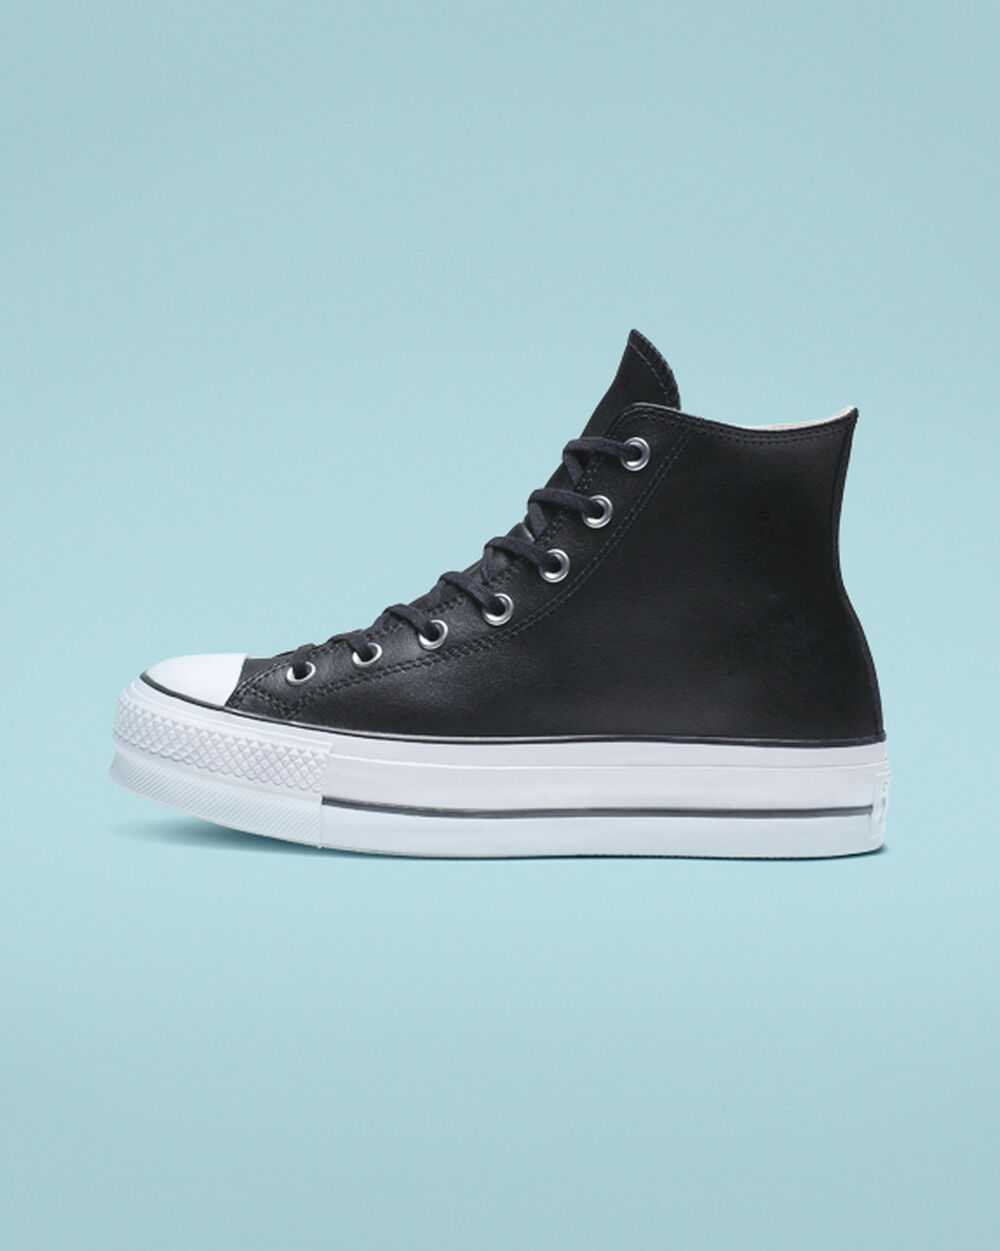 Tenis Converse Chuck Taylor All Star Mujer Negros Blancos | Mexico-706156